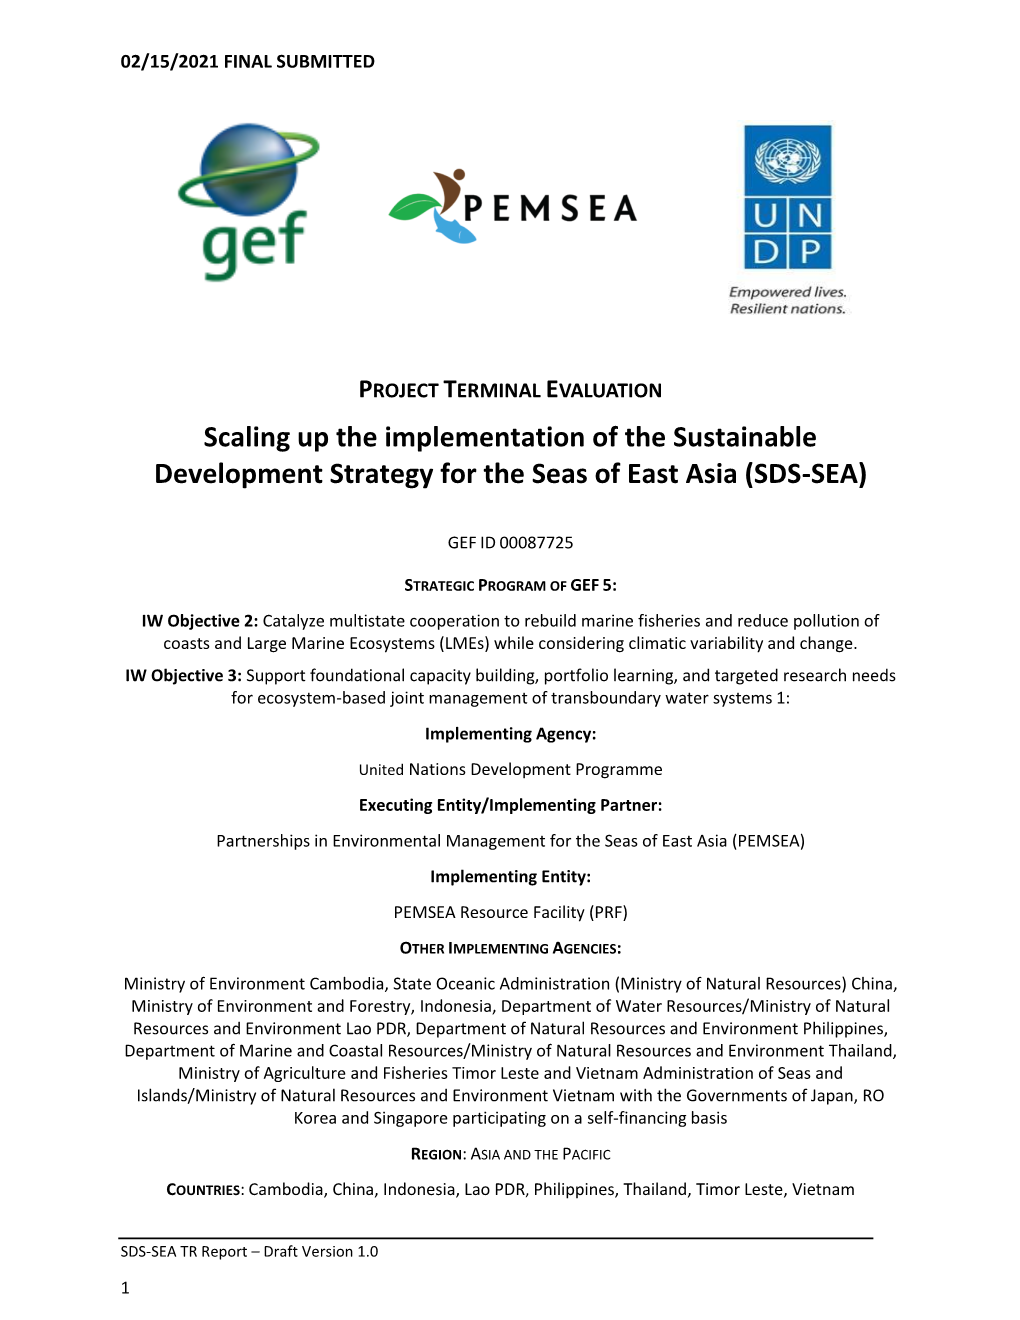 Scaling up the Implementation of the Sustainable Development Strategy for the Seas of East Asia (SDS-SEA)